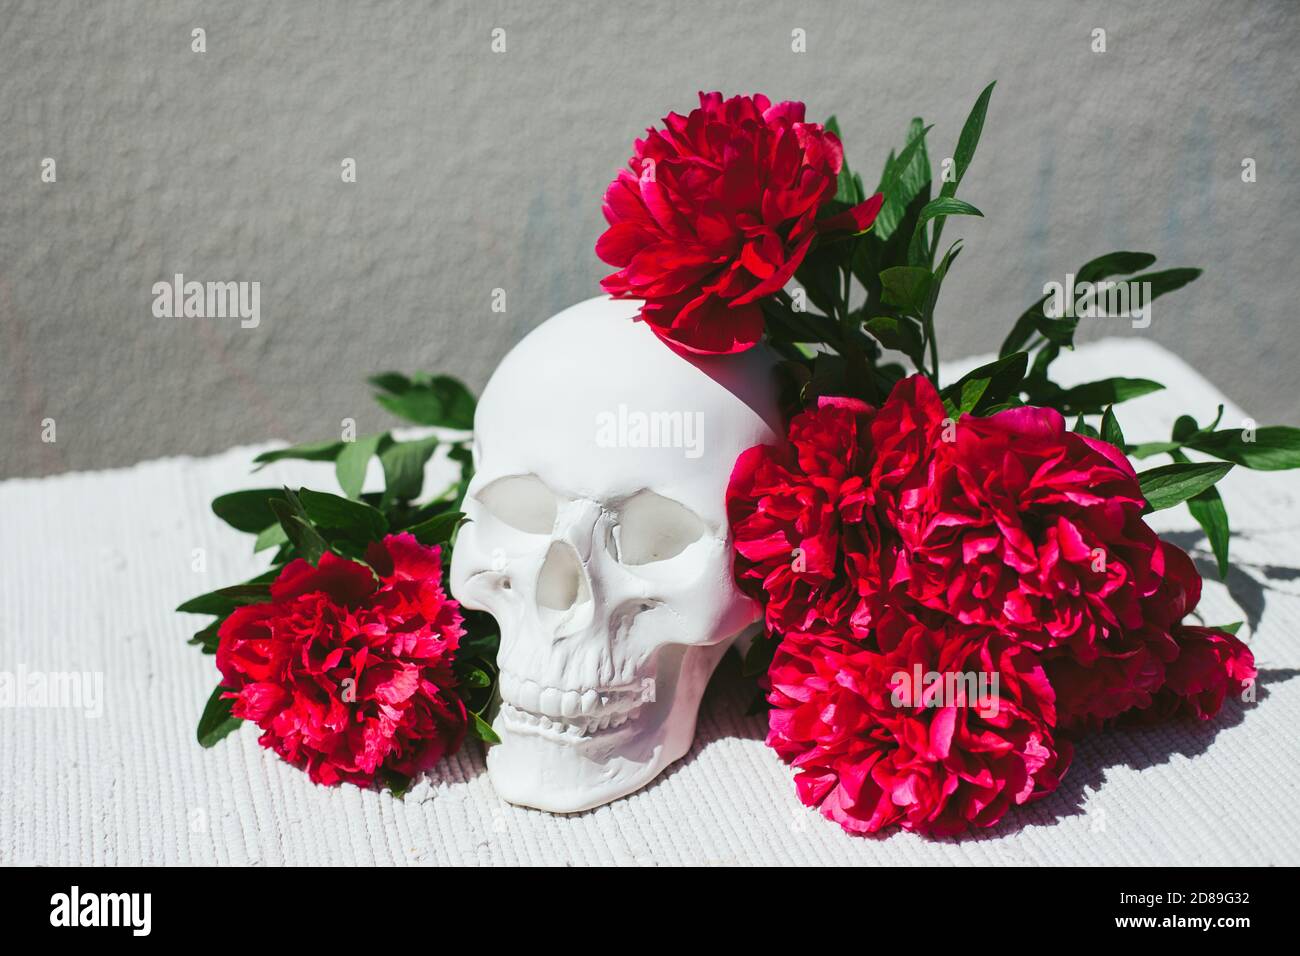 Red flowers next to a human skull decoration Stock Photo